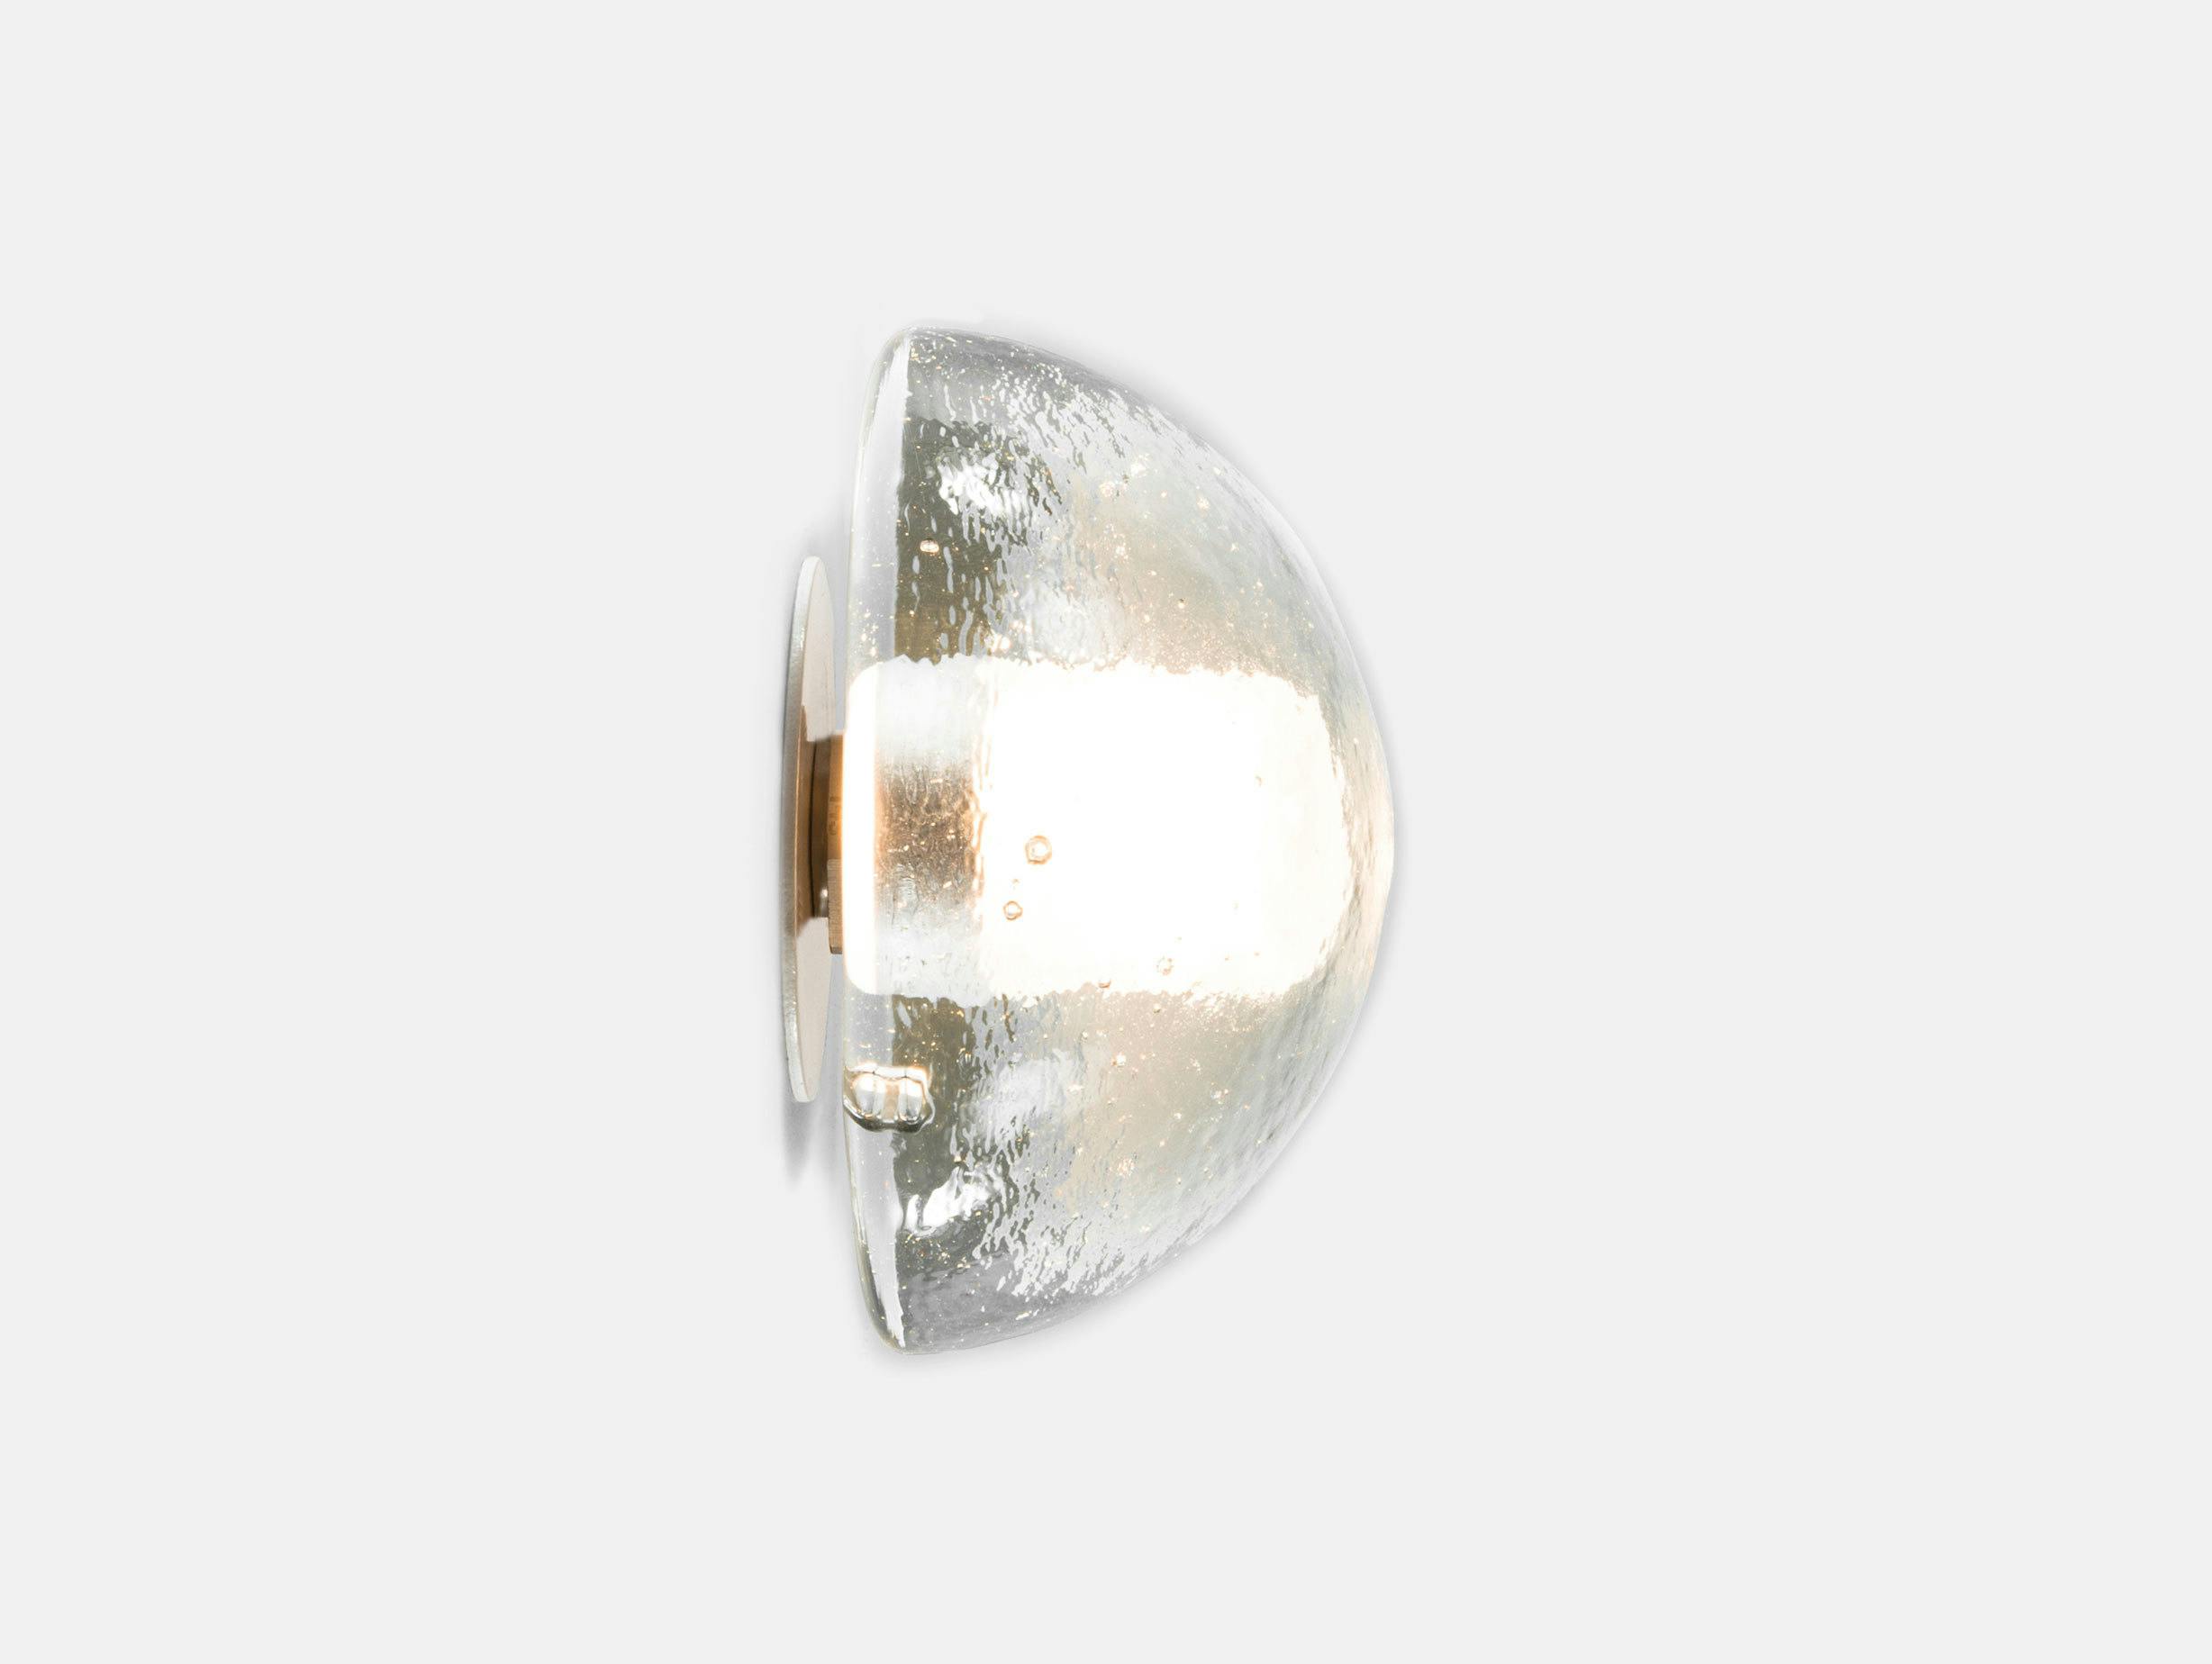 Bocci Lighting 14S Wall Sconce Side View Omer Arbel